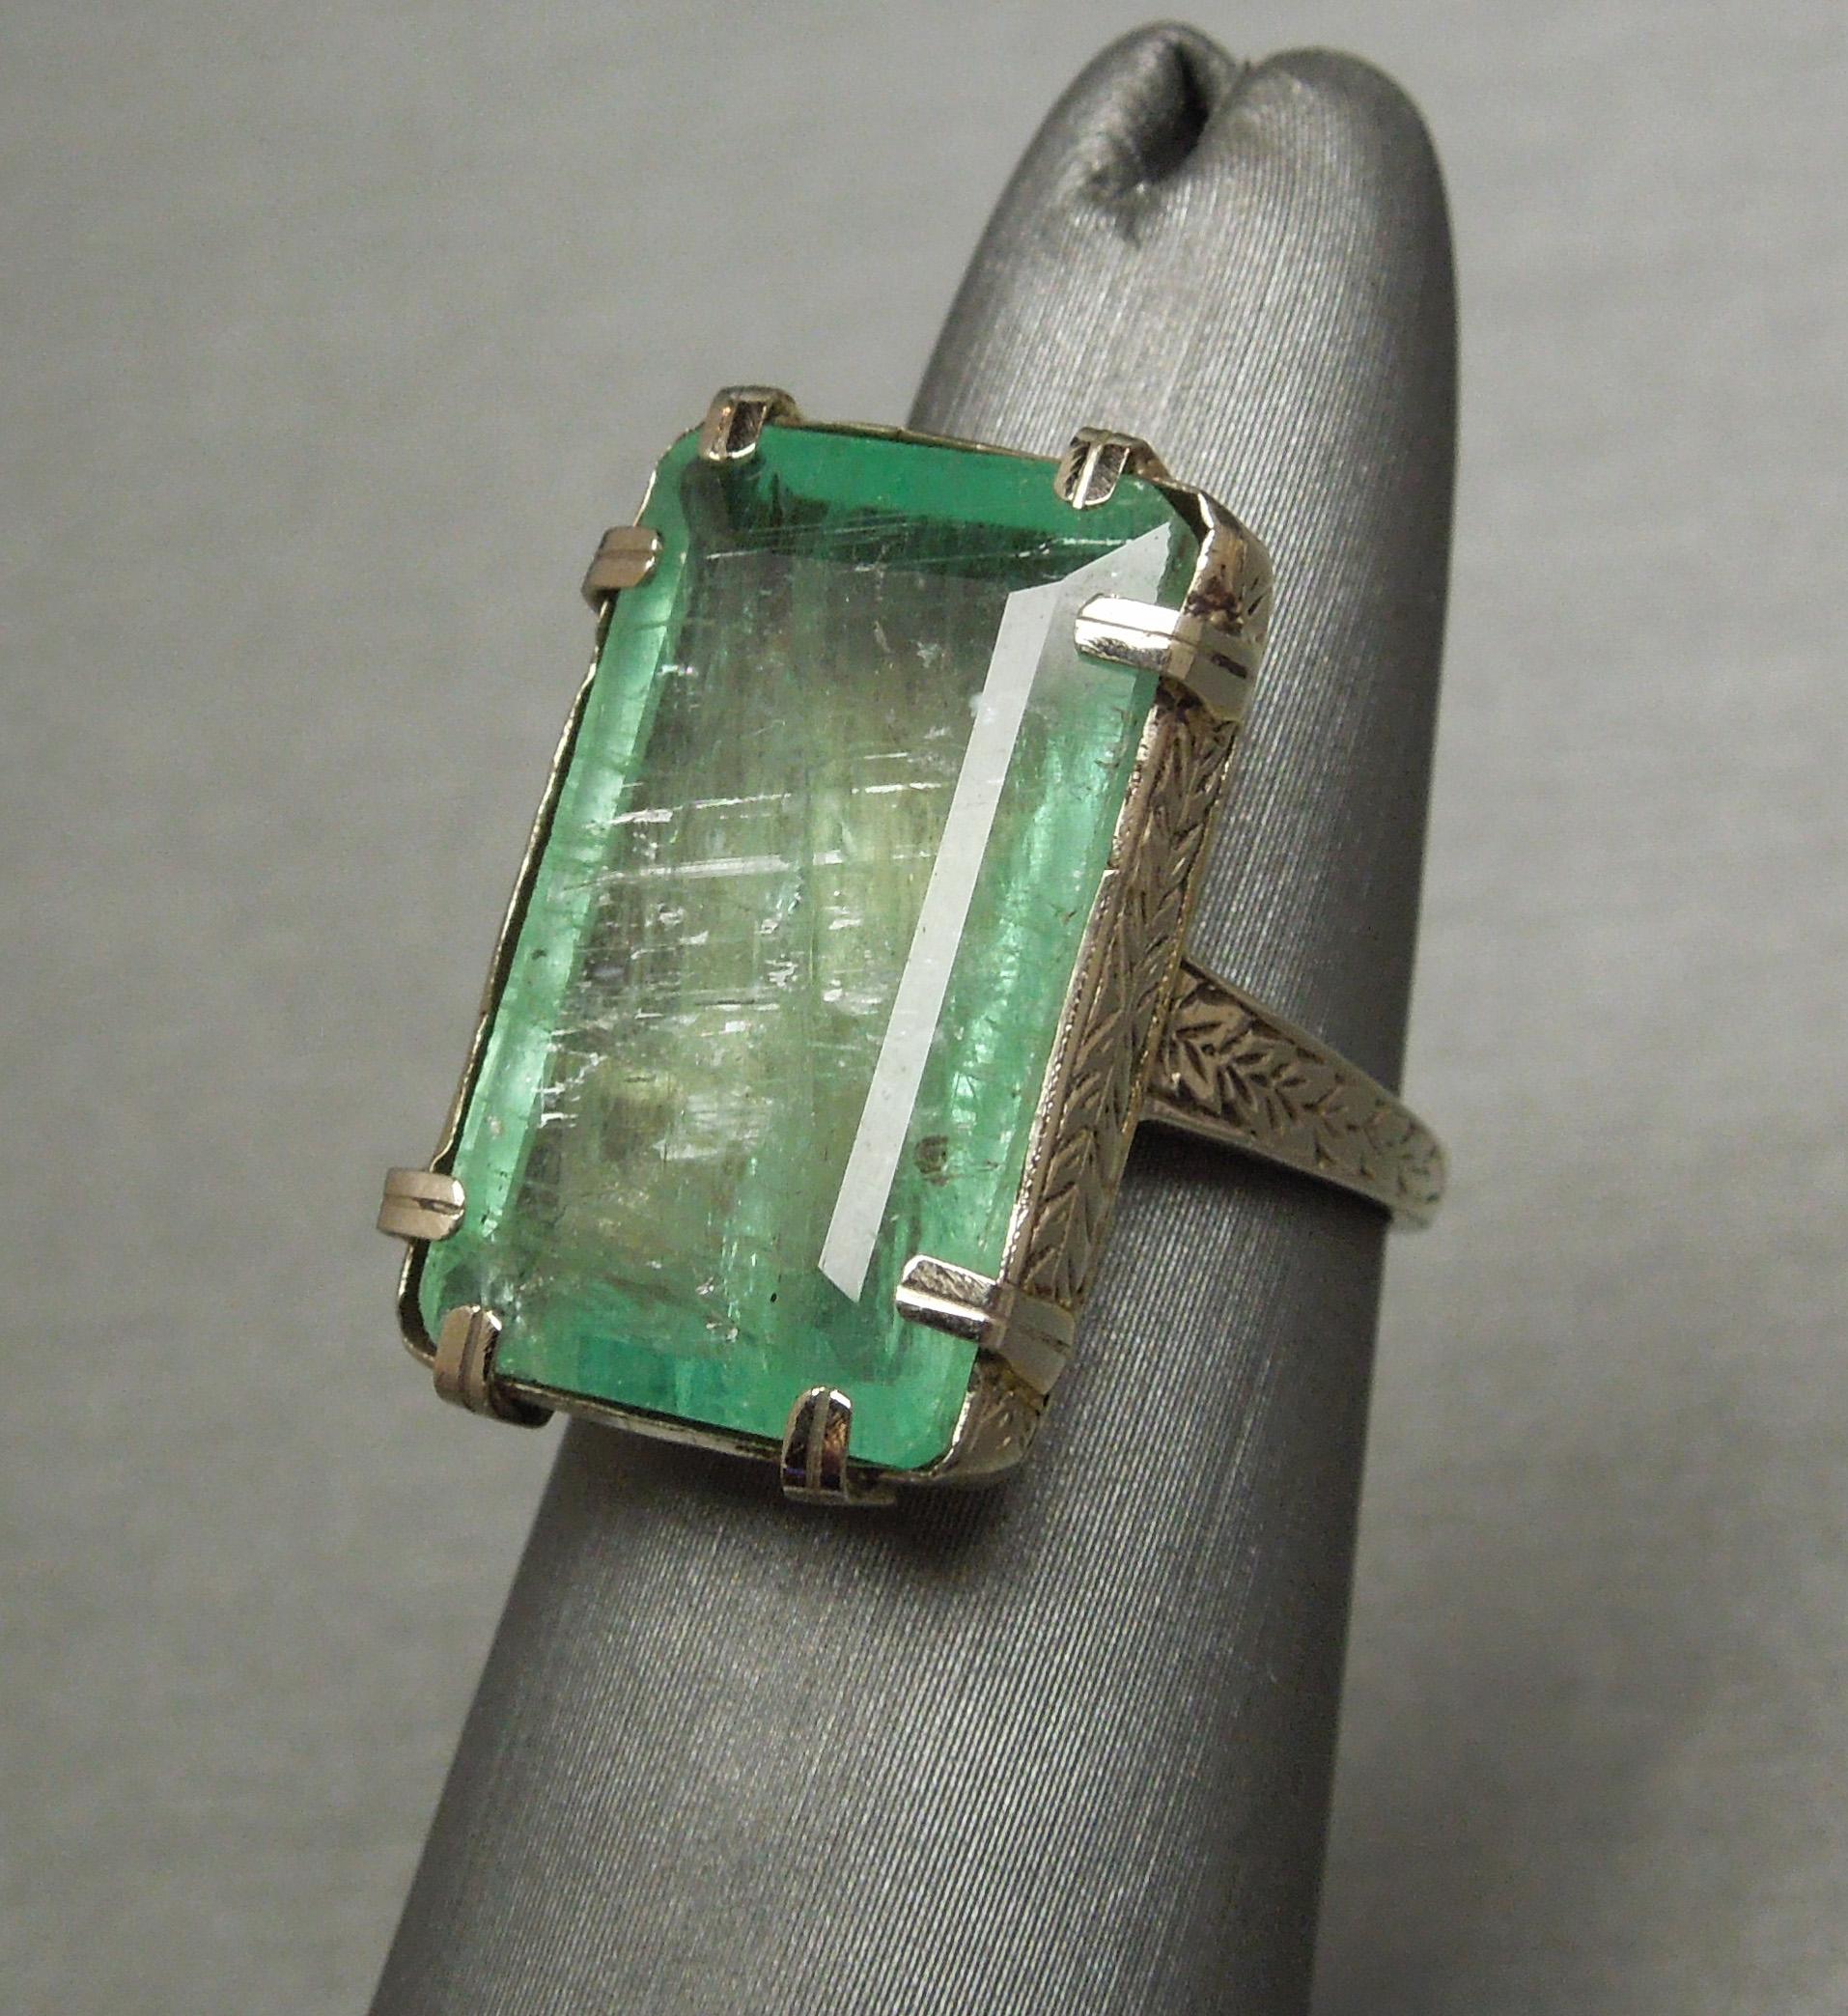 This True Art Deco Emerald Solitaire Ring features a single 12.50 carat Emerald cut Light Green Emerald, securely set in a Handmade 8-prong setting - (prongs typical of a 1920s Art Deco ring) .. Accented with Hand Engraving throughout. Very rare to